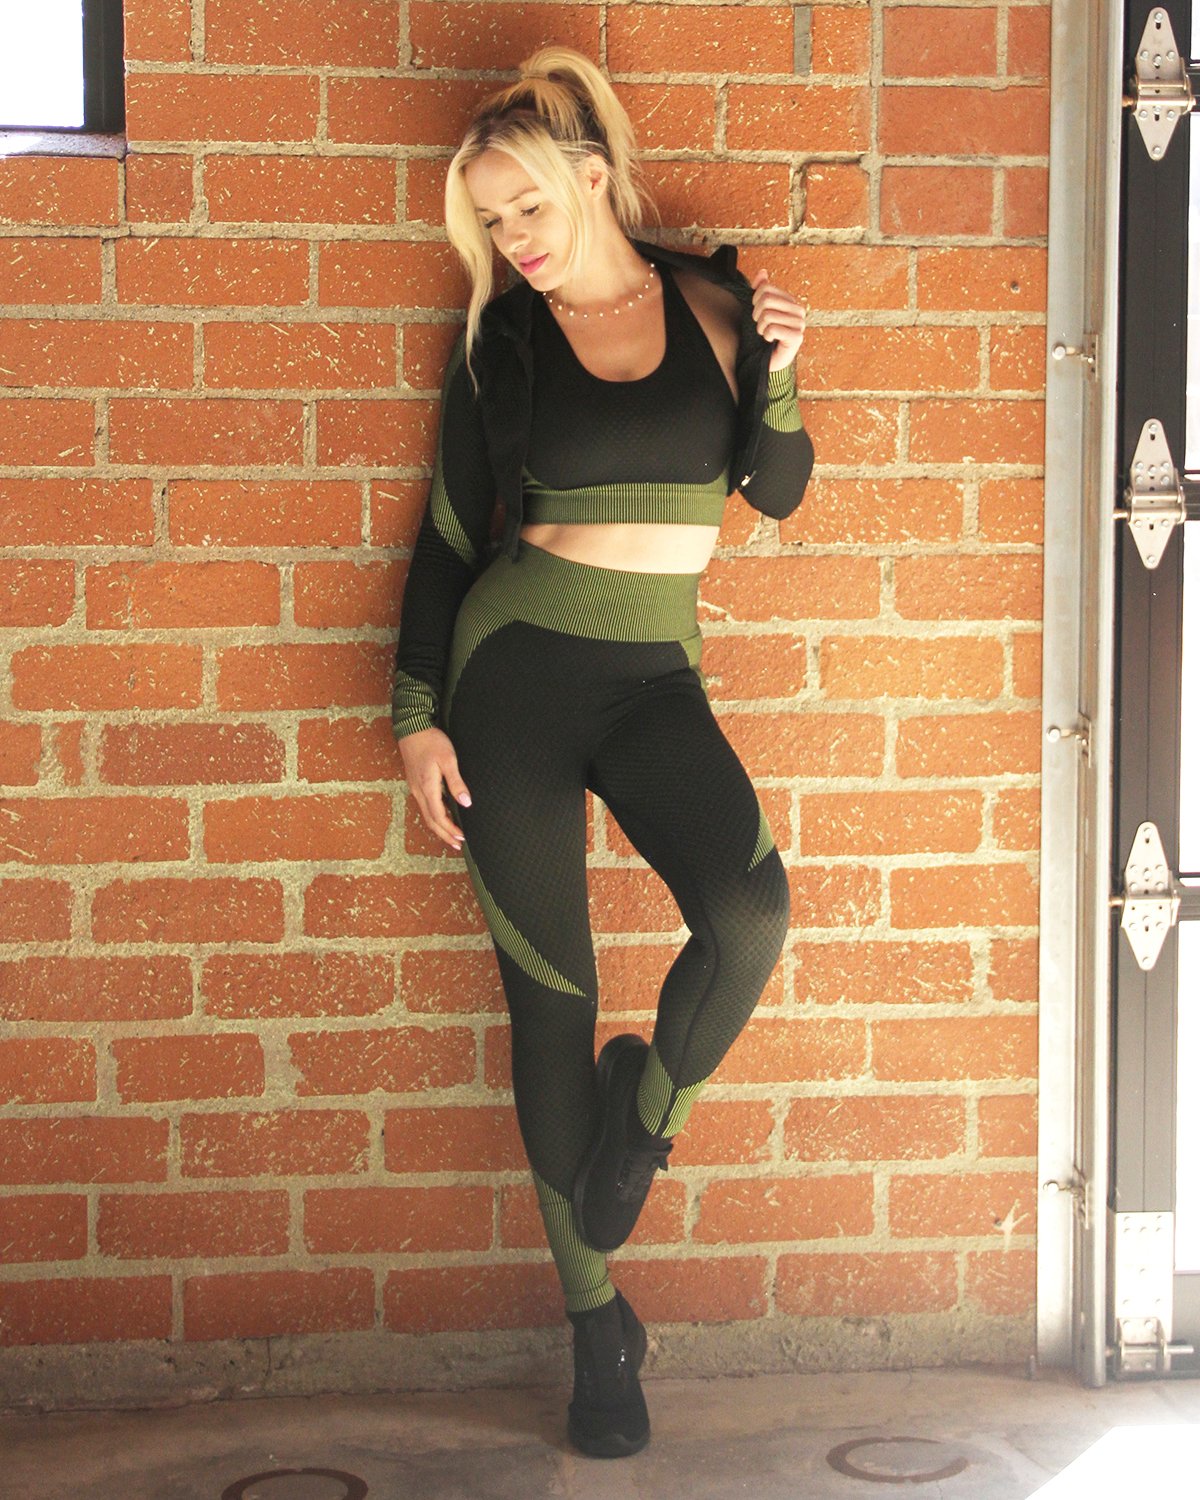 Seamless Leggings & Sports Top 2 Set - Black With Green - Women's Activewear Set from fluentclothing.com